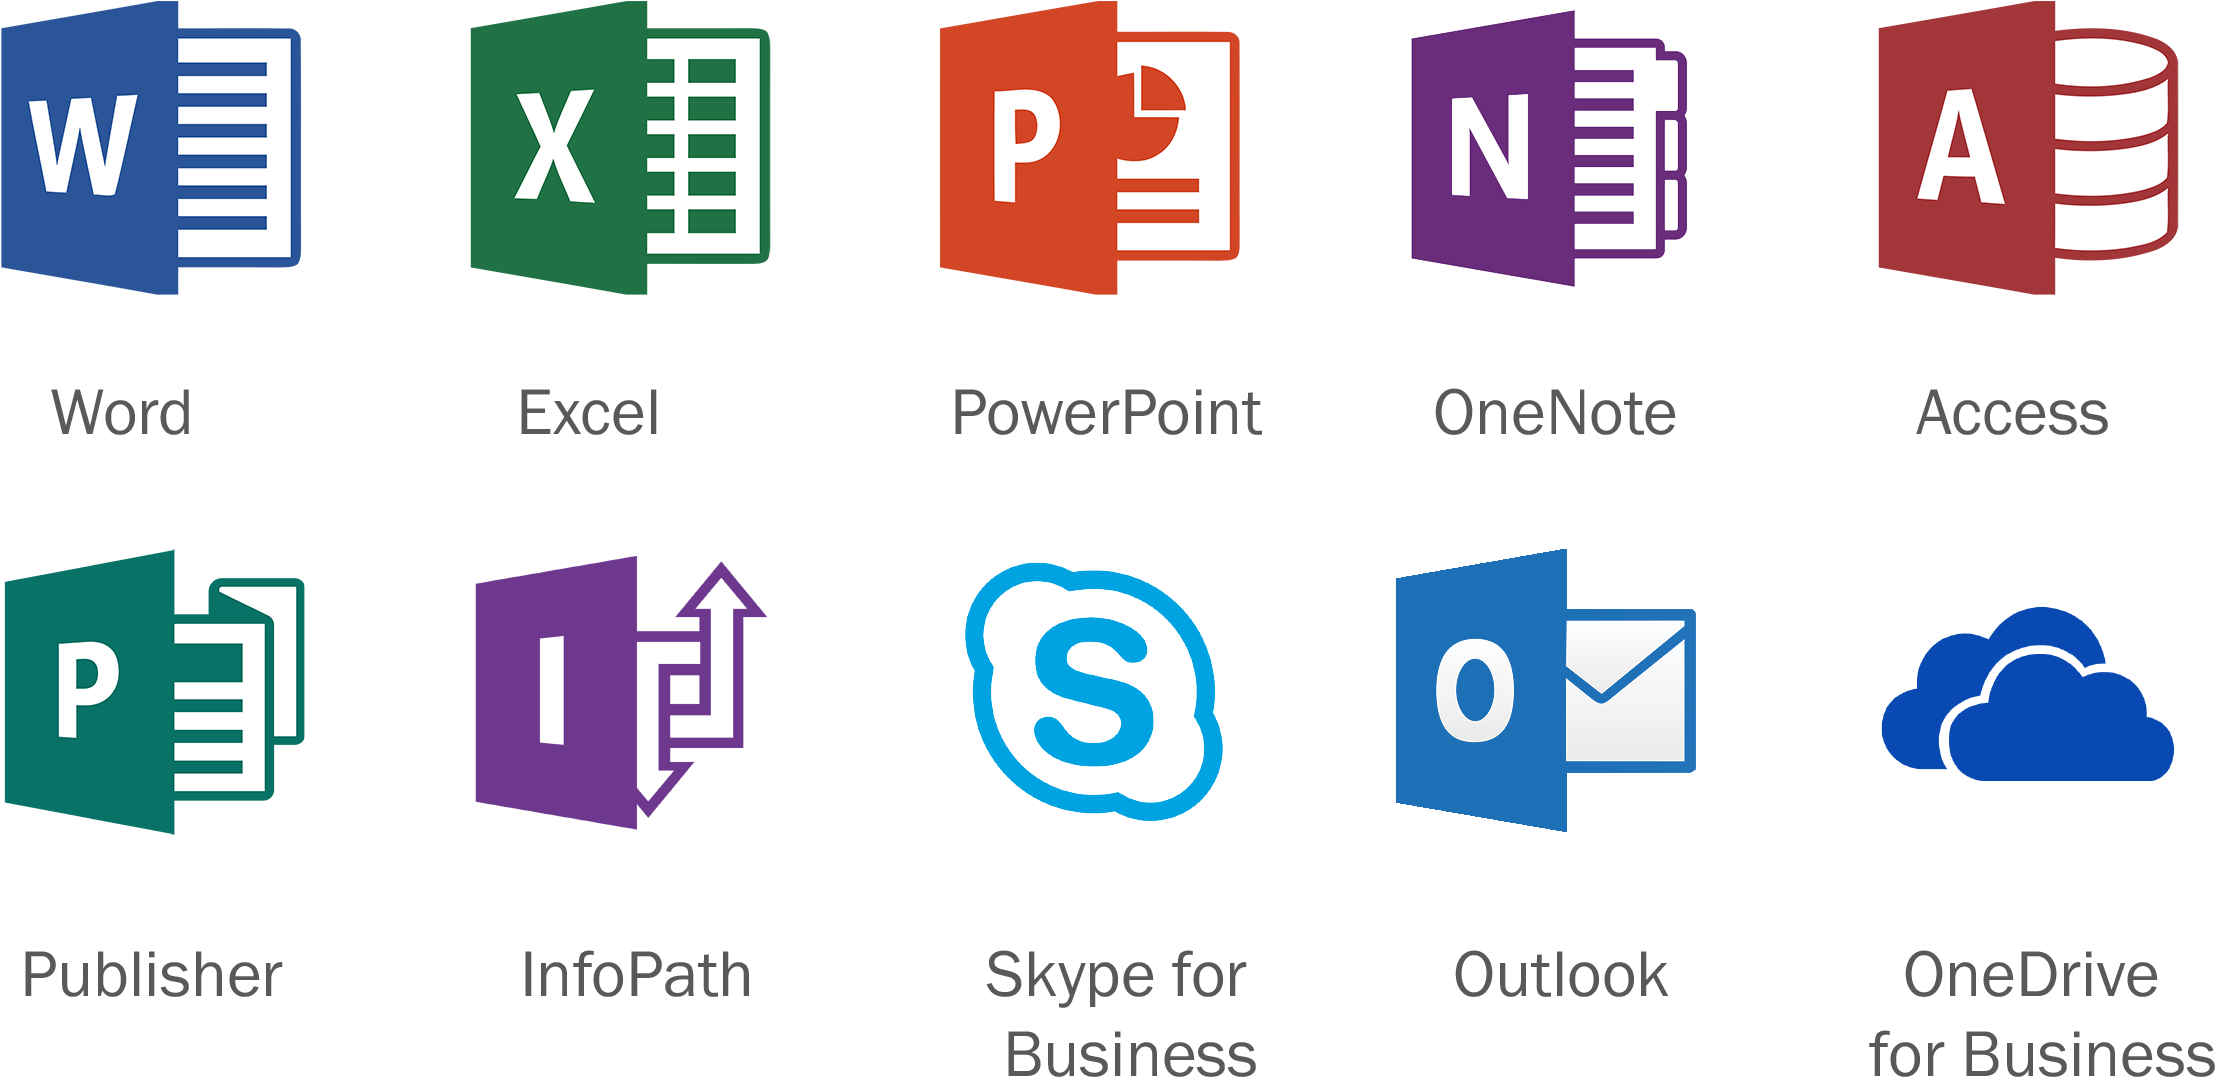 Access Office 365 Icon - Office 365 Applications Skype (2271x1110)